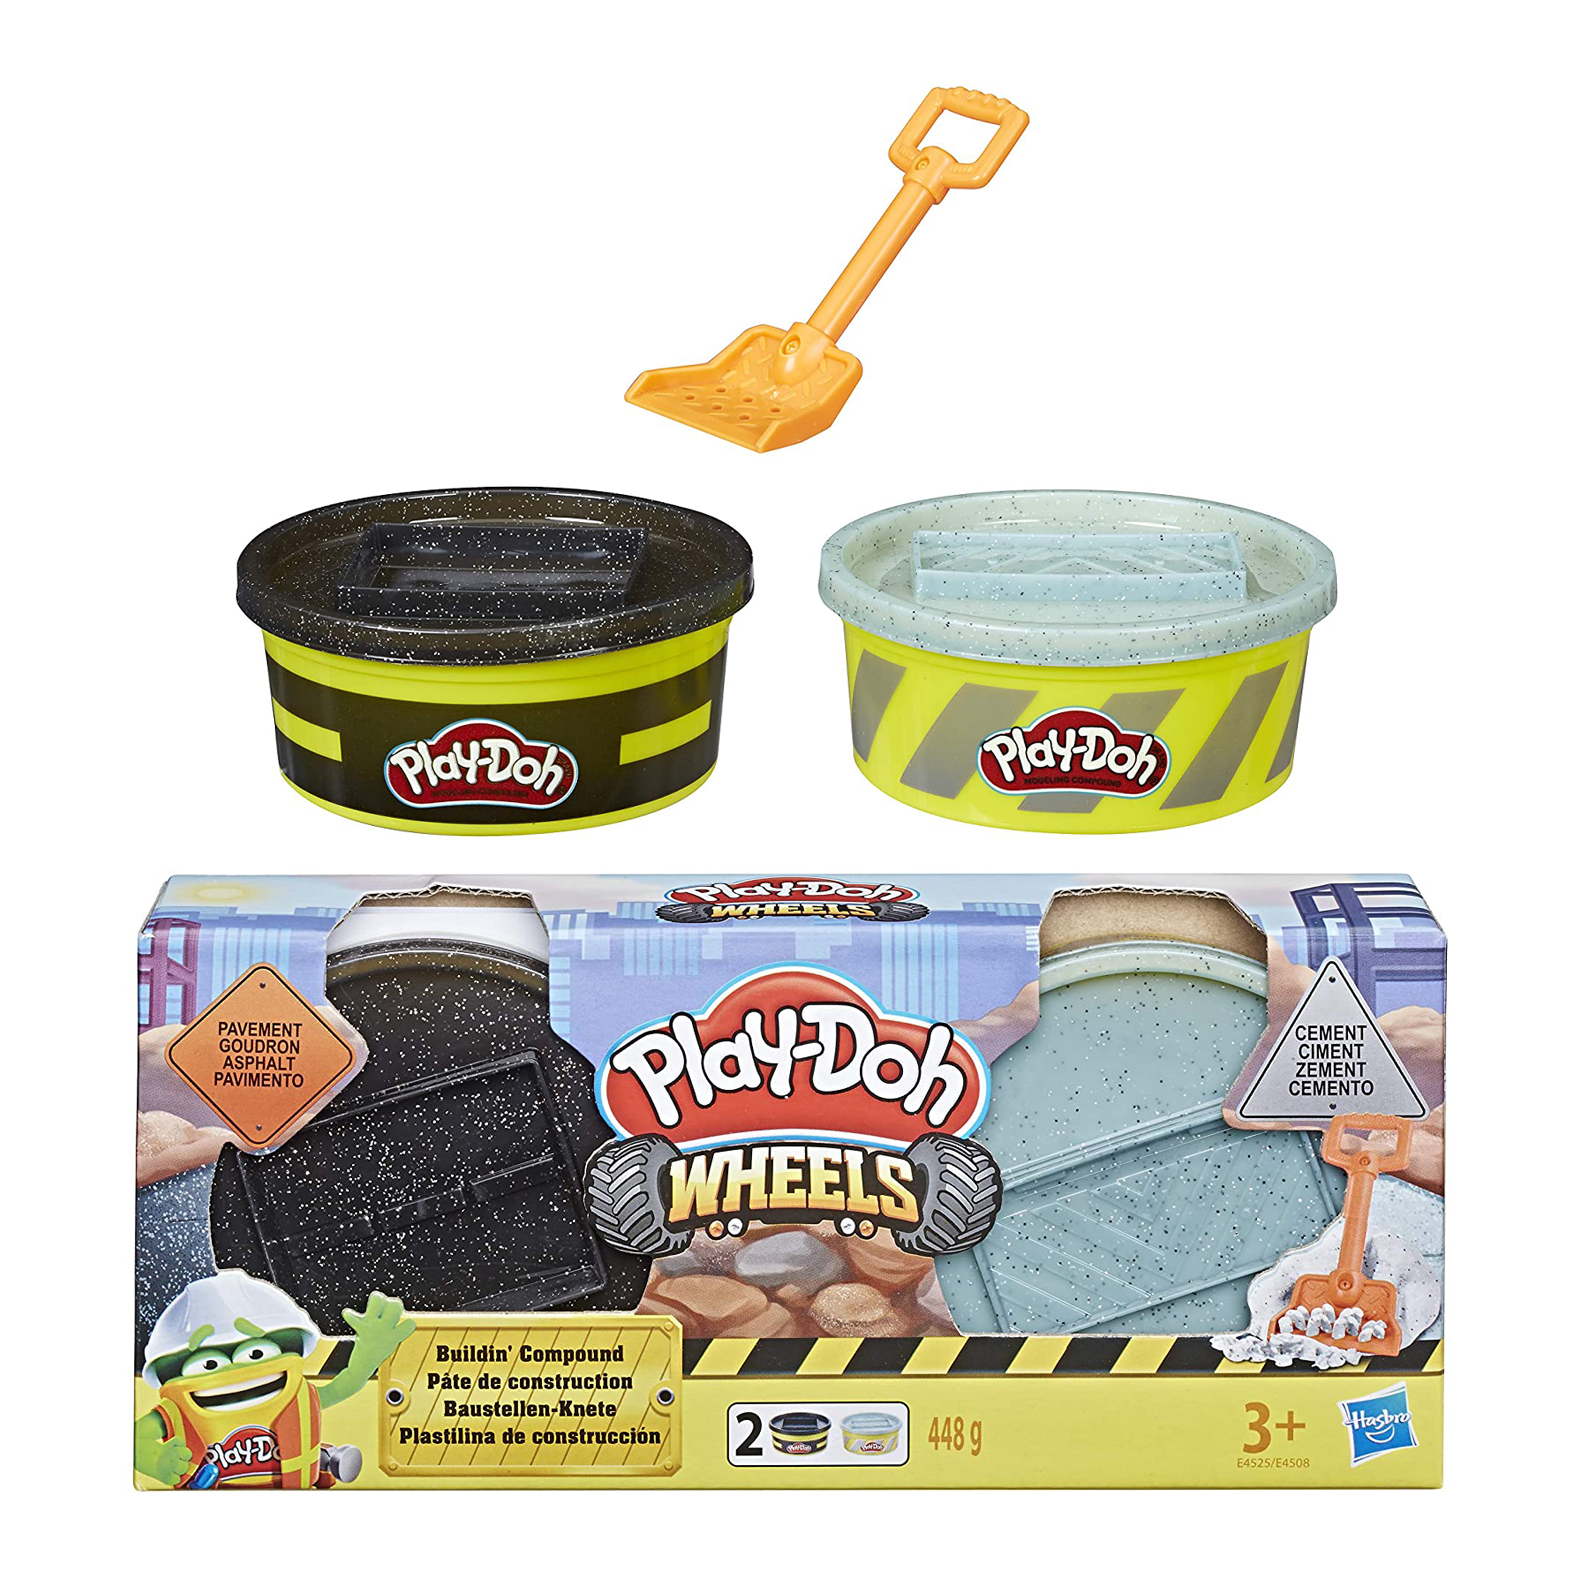 Play-Doh Wheels Cement and Pavement Buildin Compound 2-Pack